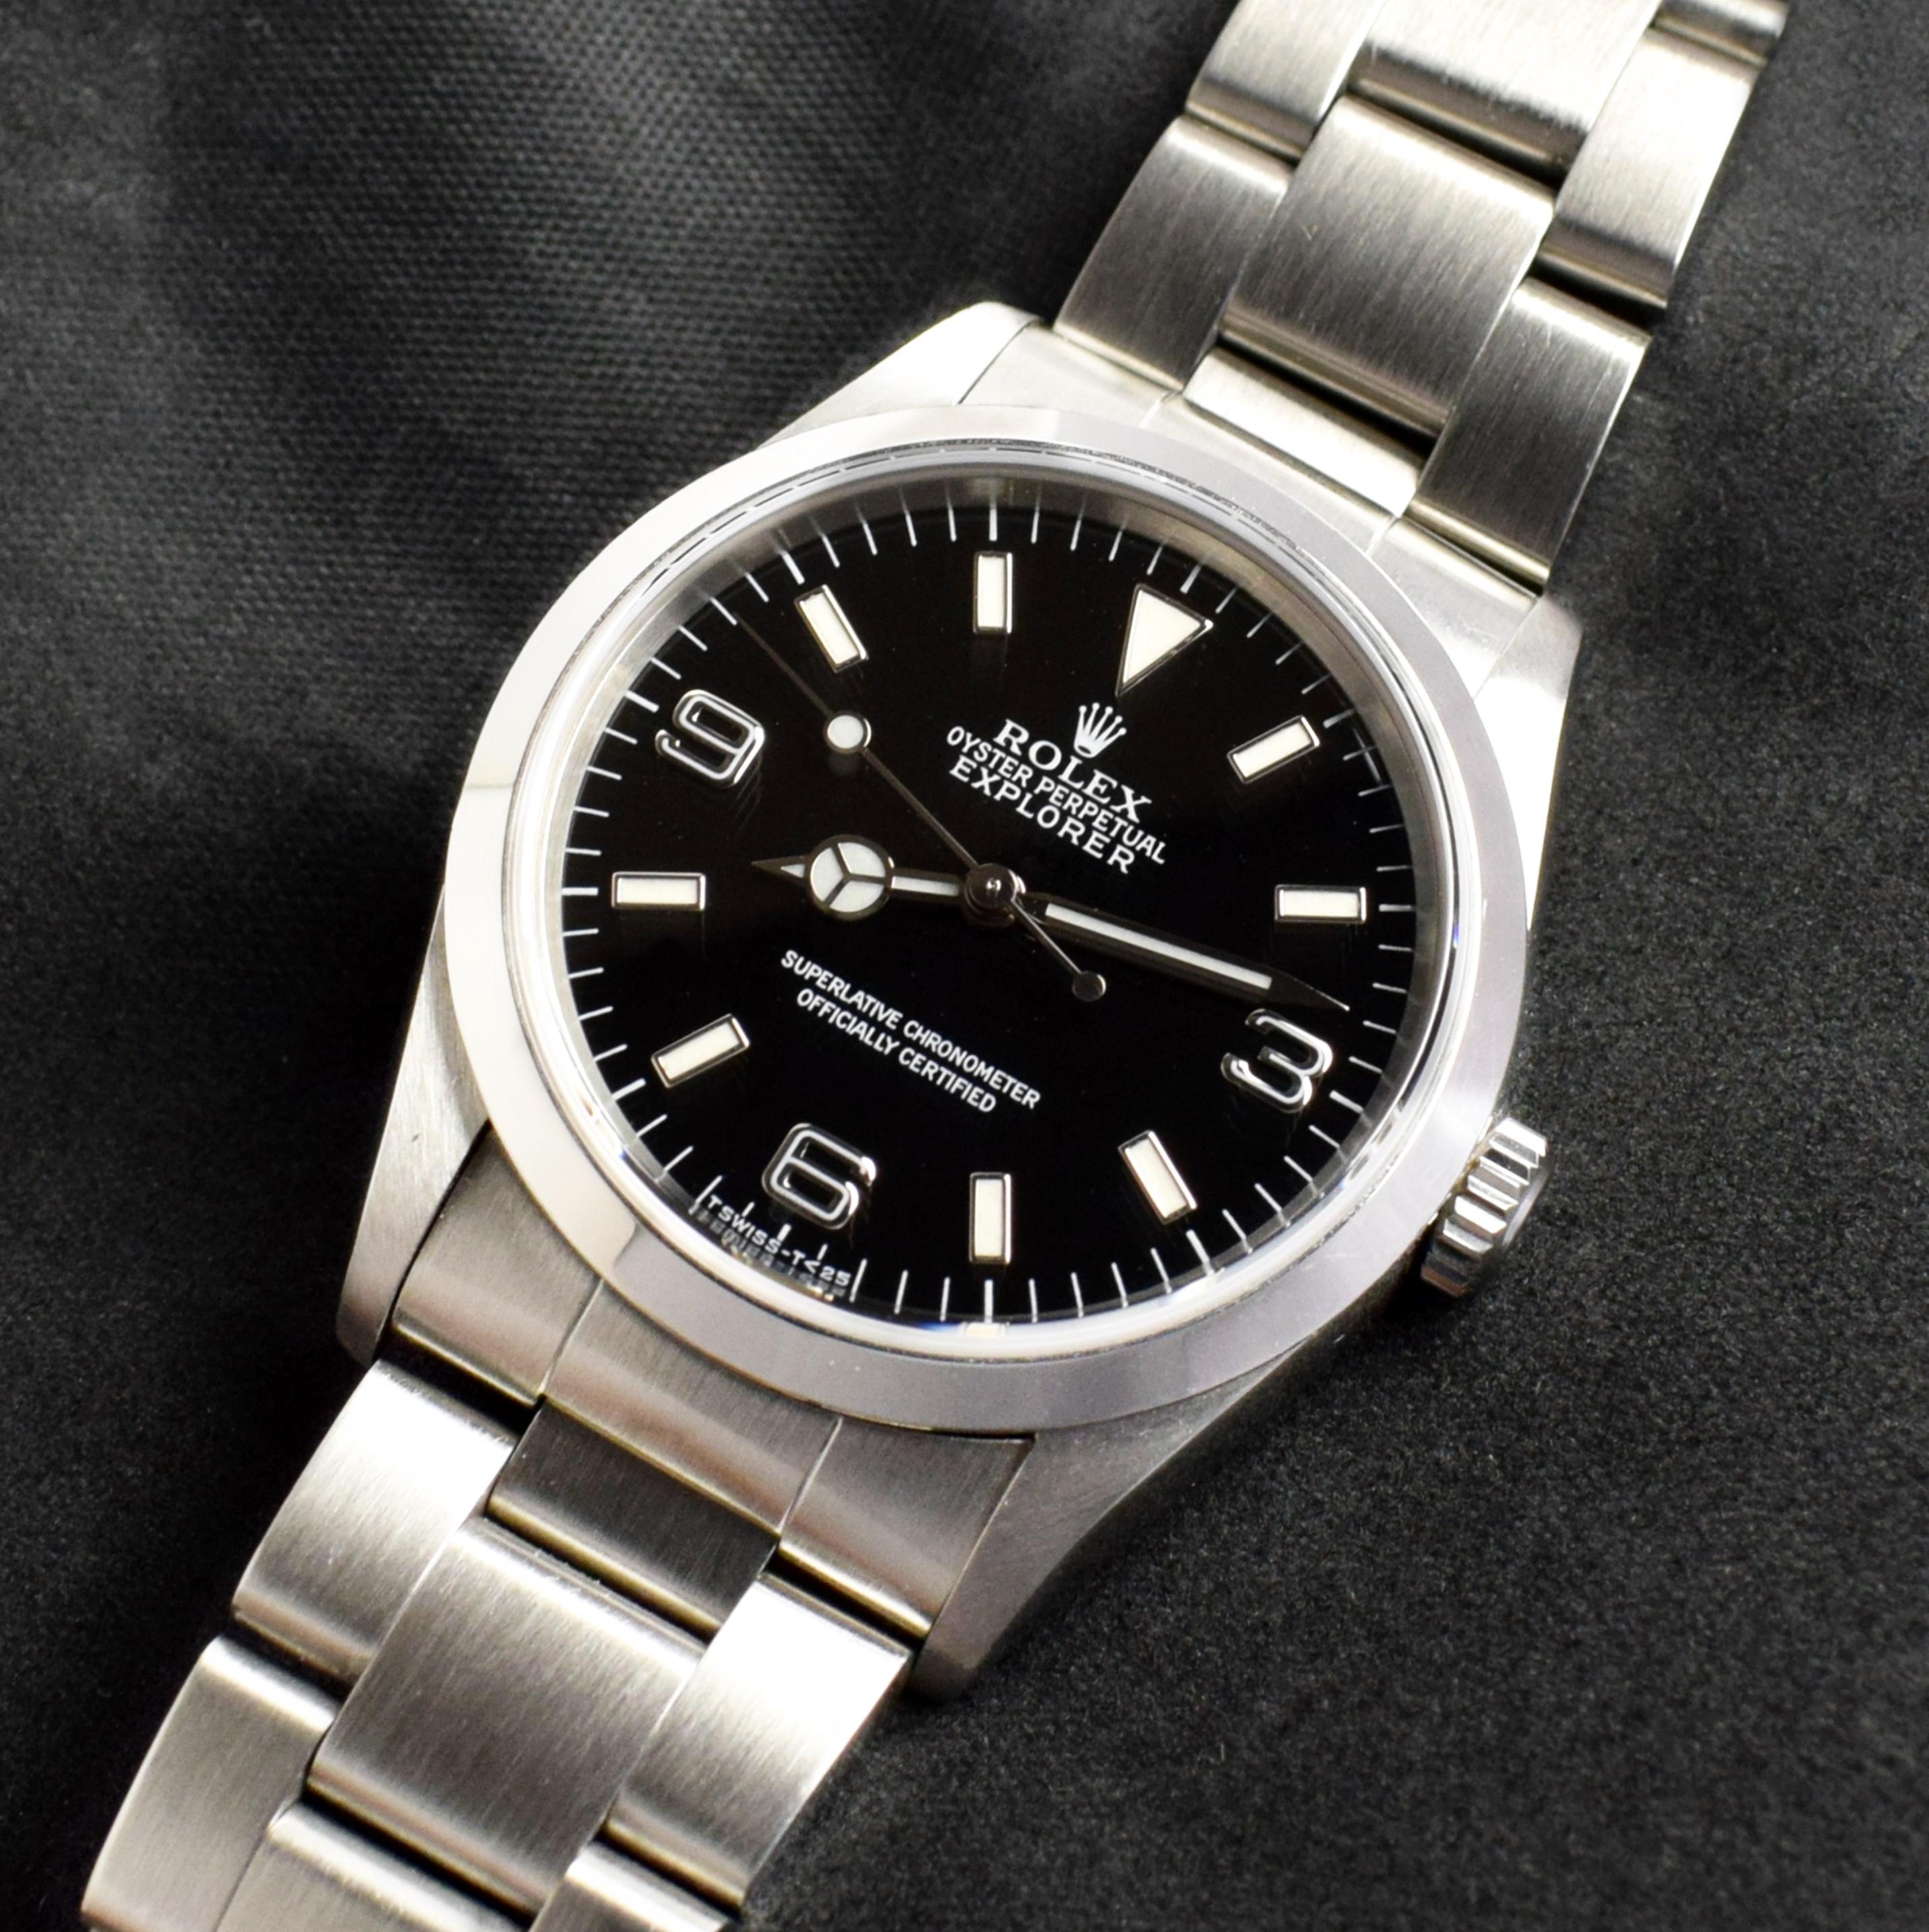 Brand: Rolex
Model: 14270
Year: 1997
Serial number: U3xxxxx
Reference: C03399
Case: Shows sign of wear with slight polish from previous; inner case back stamped 14270
Dial: Excellent Condition black tritium T<25 dial w/ luminova hands
Bracelet: